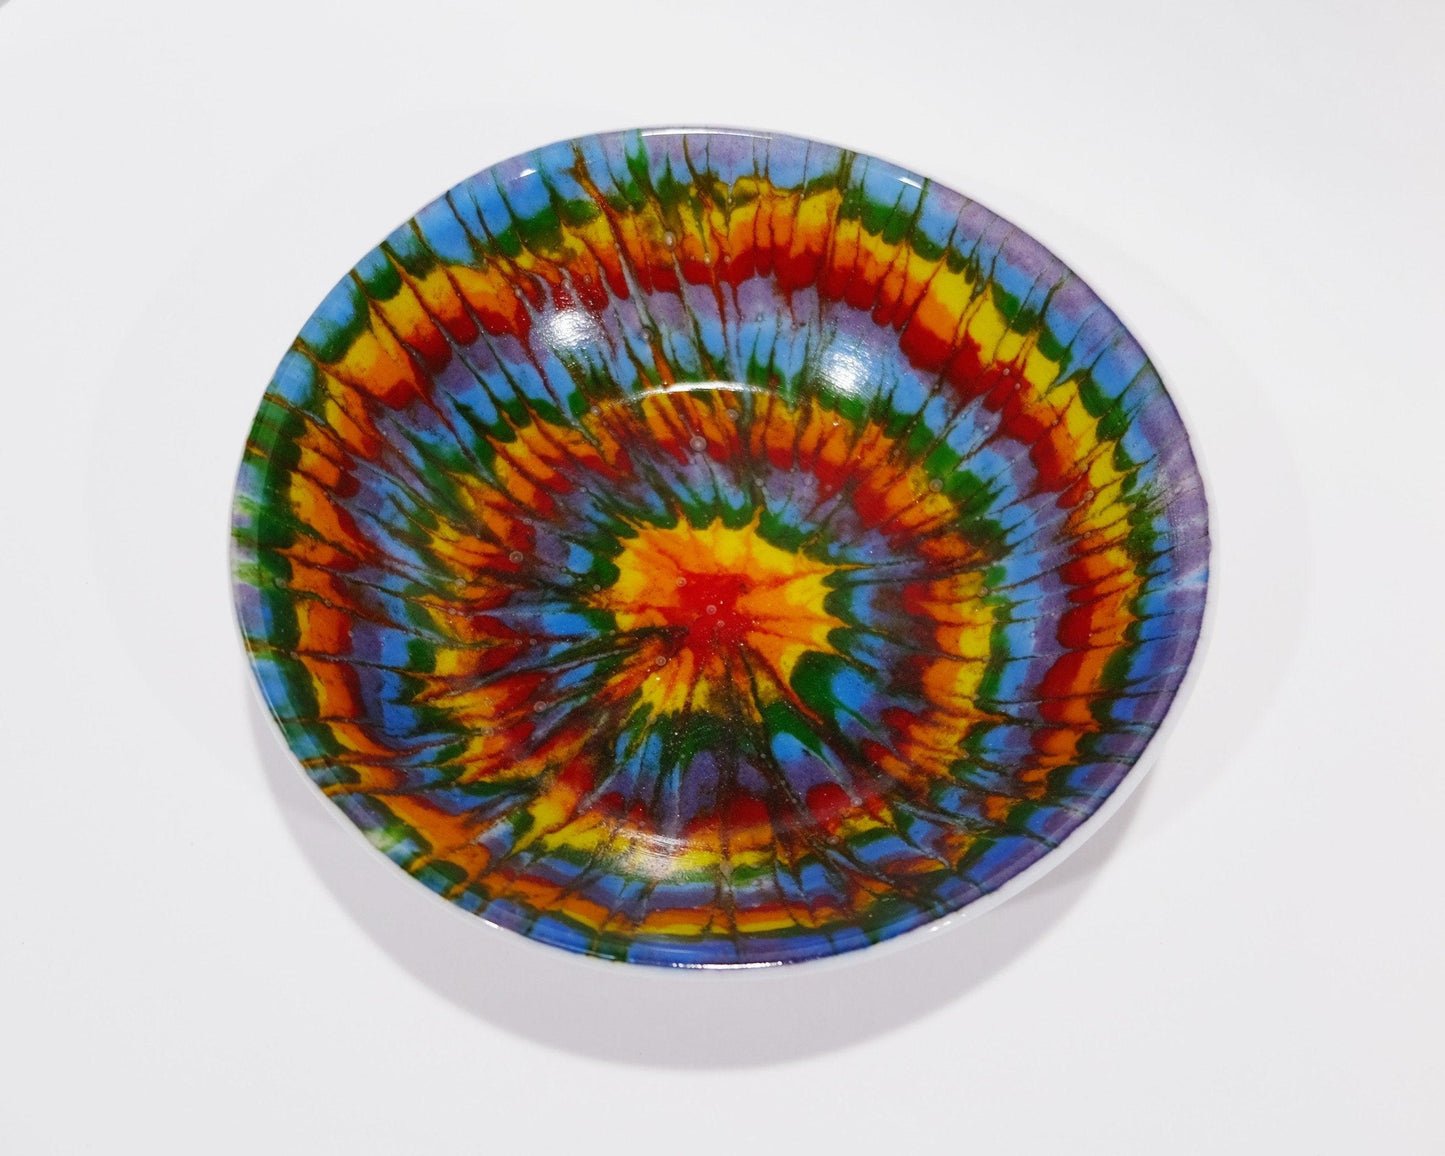 Handcrafted 8.5 Inch Wide Rainbow Tie Dye-Look White Fused Glass Bowl - Unique and Colorful Dish